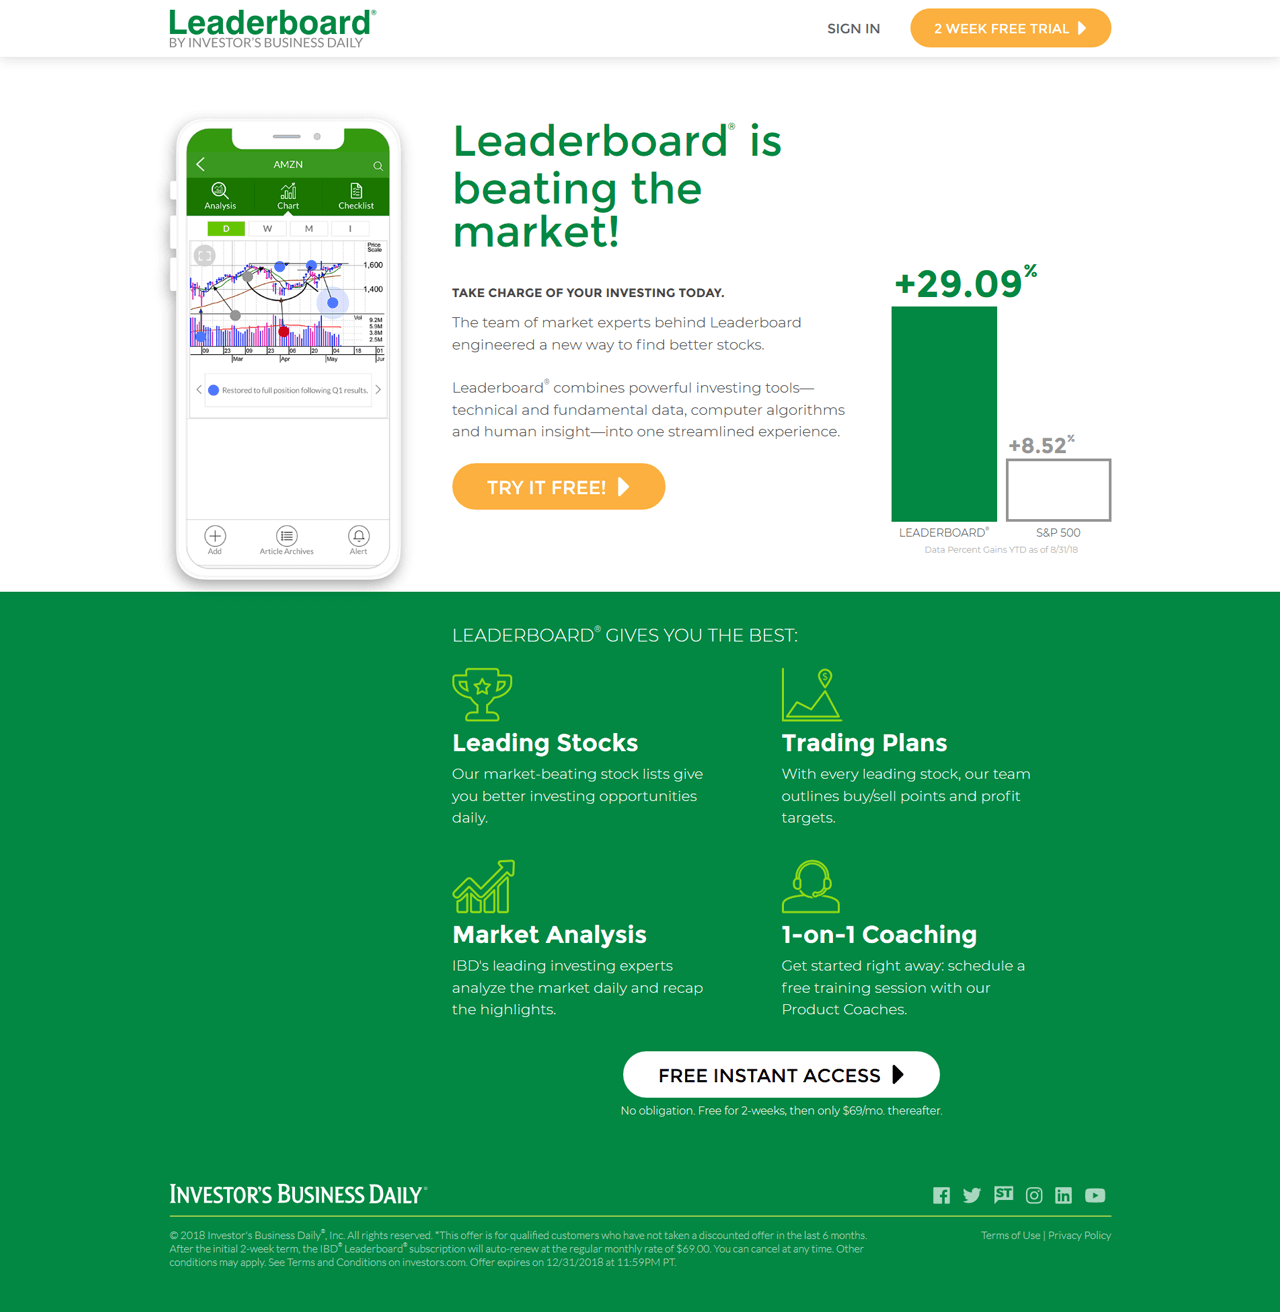 Leaderboard landing page - Investor's Business Daily